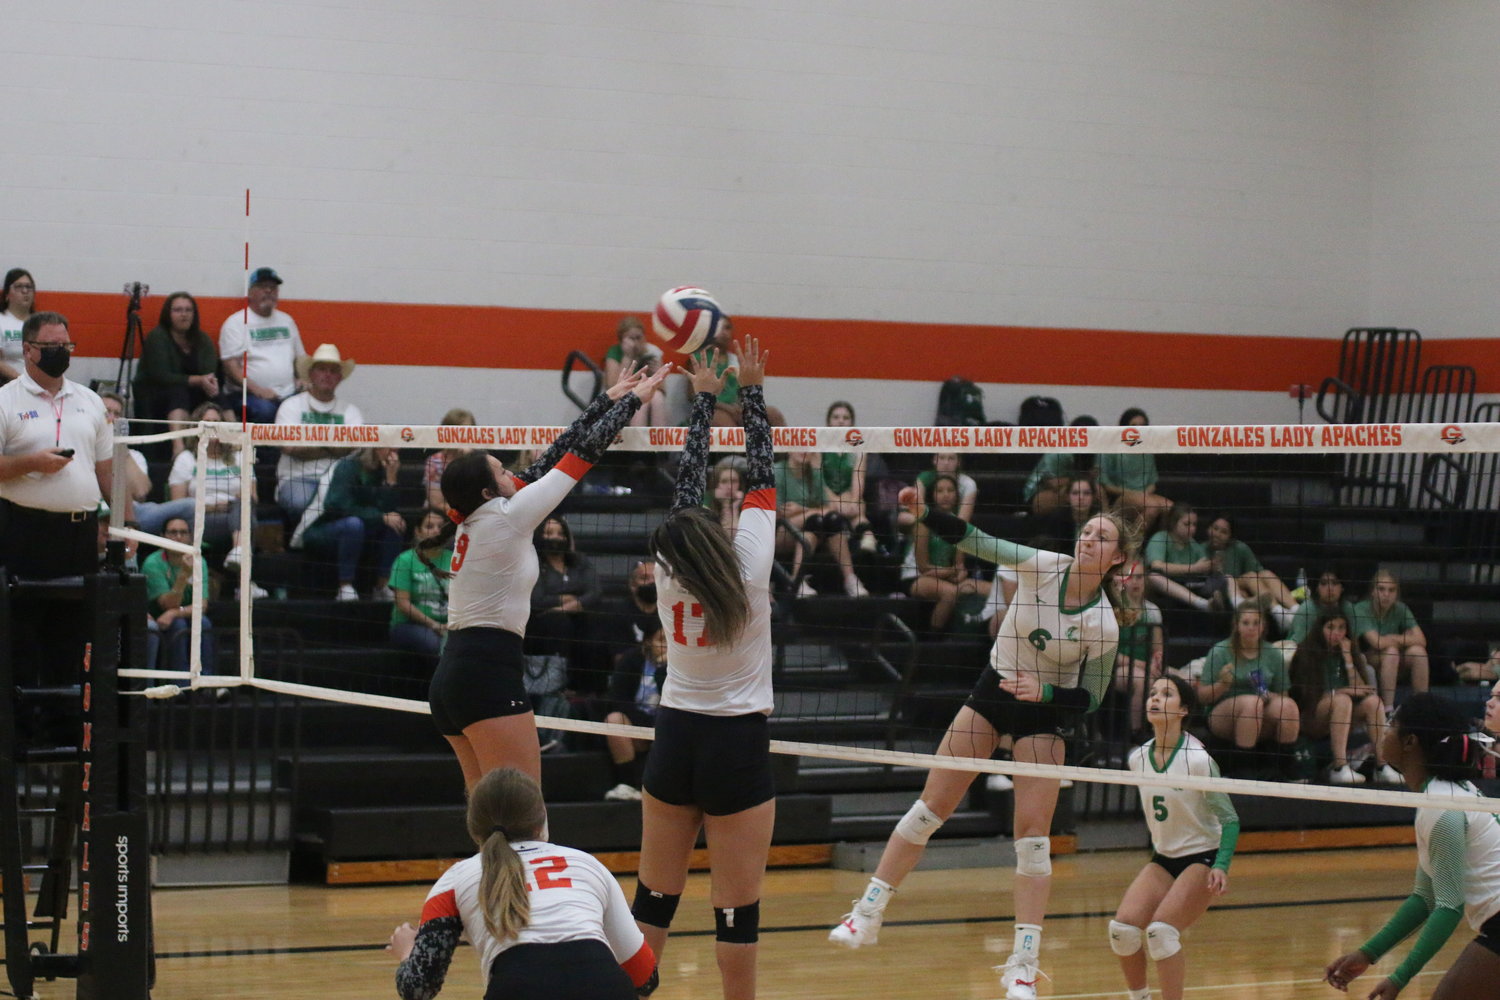 Kristyn Baker (9) and Marissa Molina (17) go up for a block against the Pleasanton Lady Eagles in the Friday, Oct. 8, contest. Macy Sample (12) waits to see the outcome.